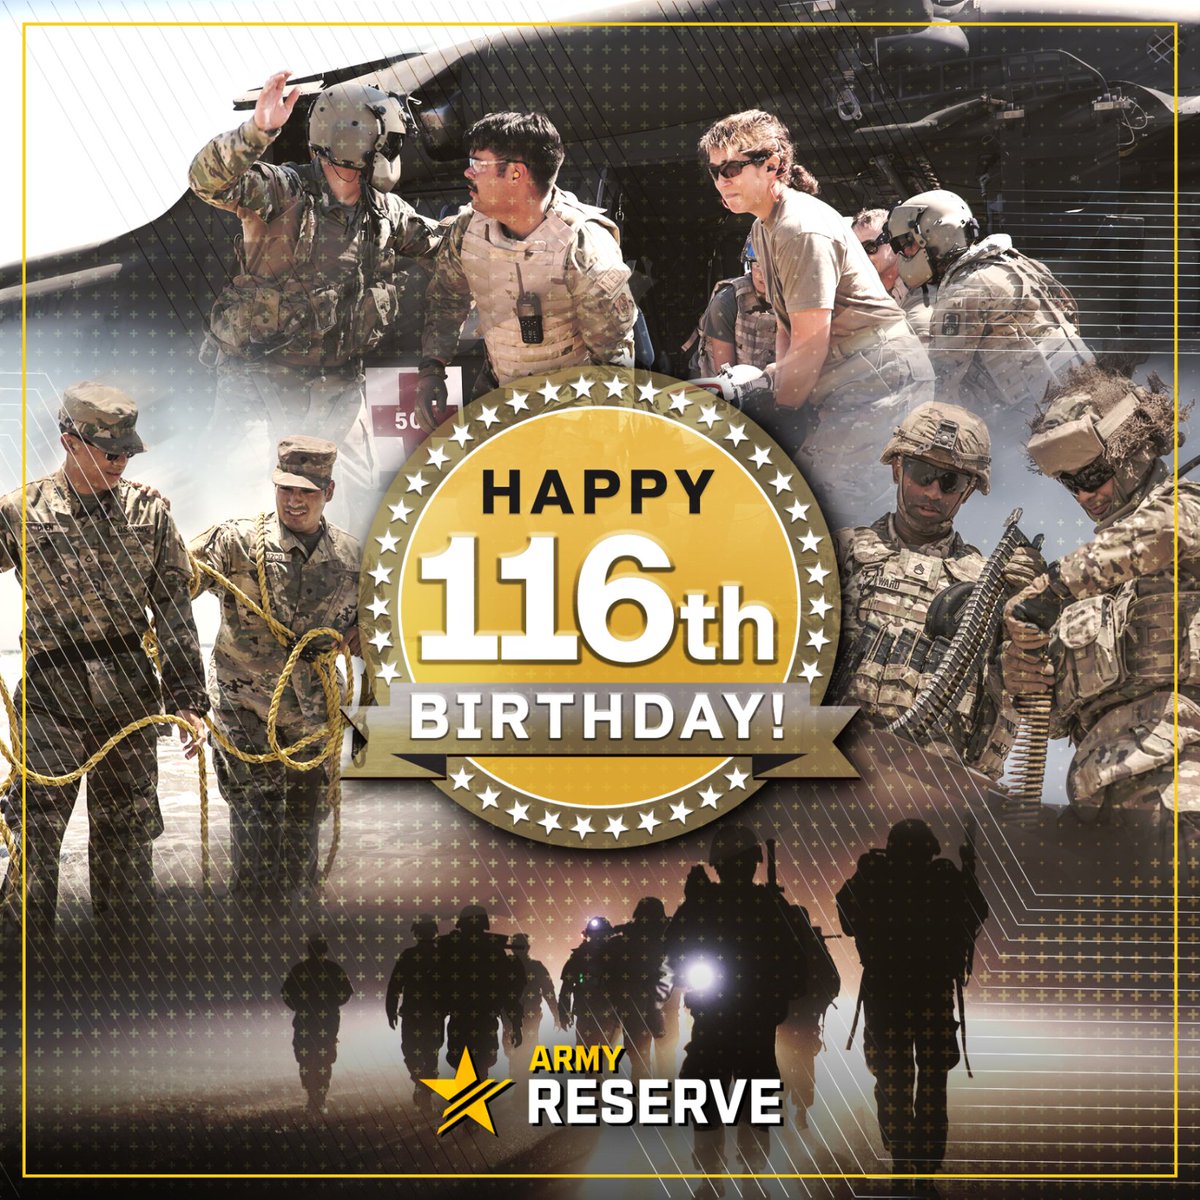 Join us in celebrating the @USArmyReserve's 116th birthday with a like on this post. Since 1908, its citizen Soldiers have answered the call to serve using their critical skills to defend our freedoms and liberties. Happy birthday! 🎂